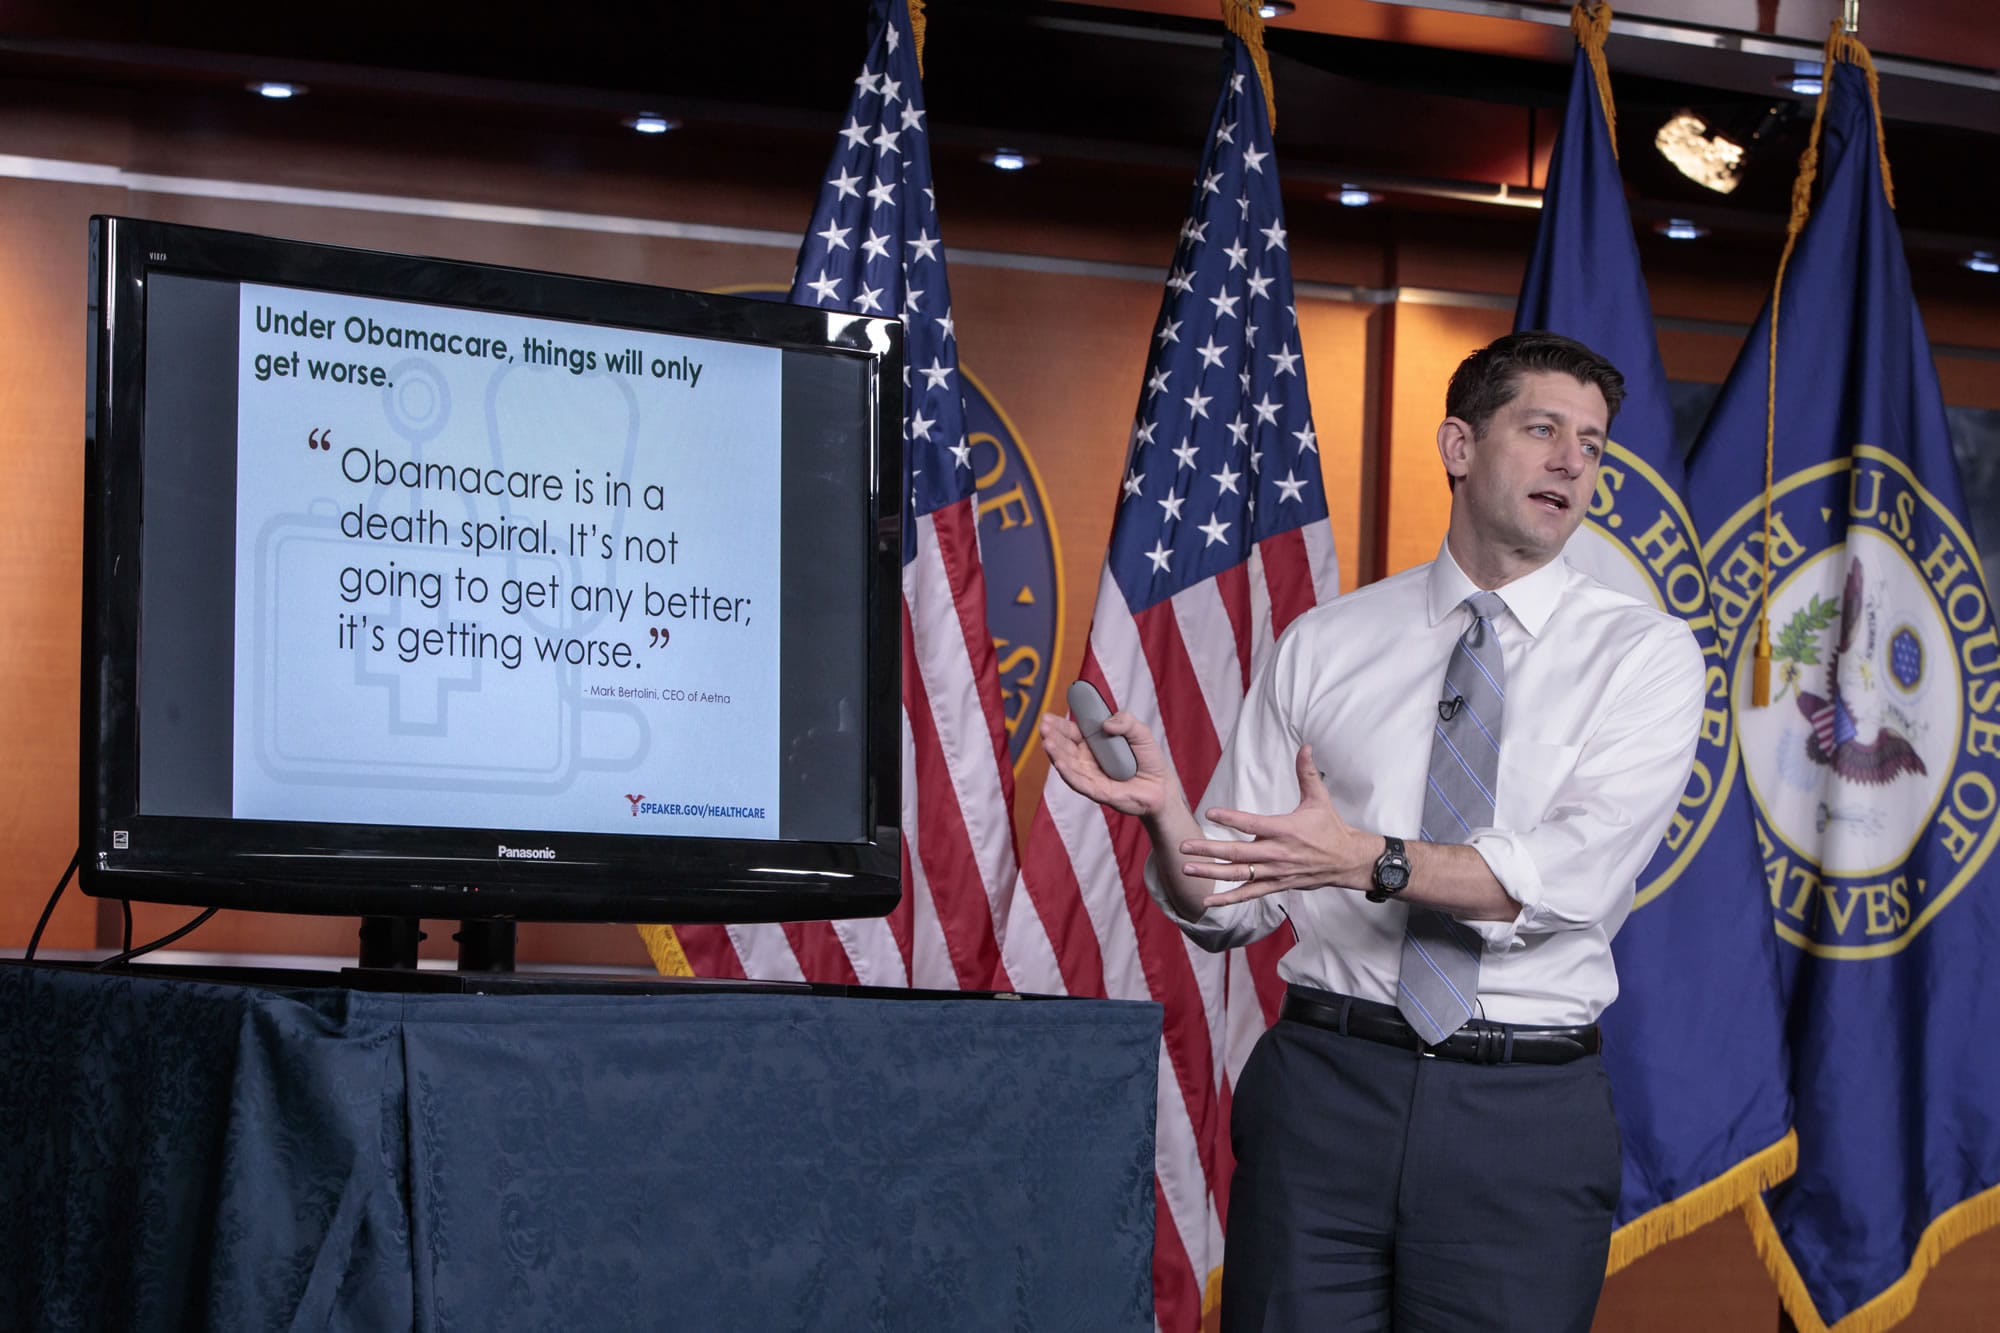 FILE - In this March 9, 2017 file photo, House Speaker Paul Ryan of Wis. uses charts and graphs to make his case for the GOP's long-awaited plan to repeal and replace the Affordable Care Act during a news conference on Capitol Hill in Washington. Republicans pushing a plan to dismantle Barack Obama's health care law are bracing for a Congressional Budget Office analysis widely expected to conclude that fewer Americans will have health coverage under the proposal, despite President Donald Trump's promise of "insurance for everybody." (AP Photo/J.